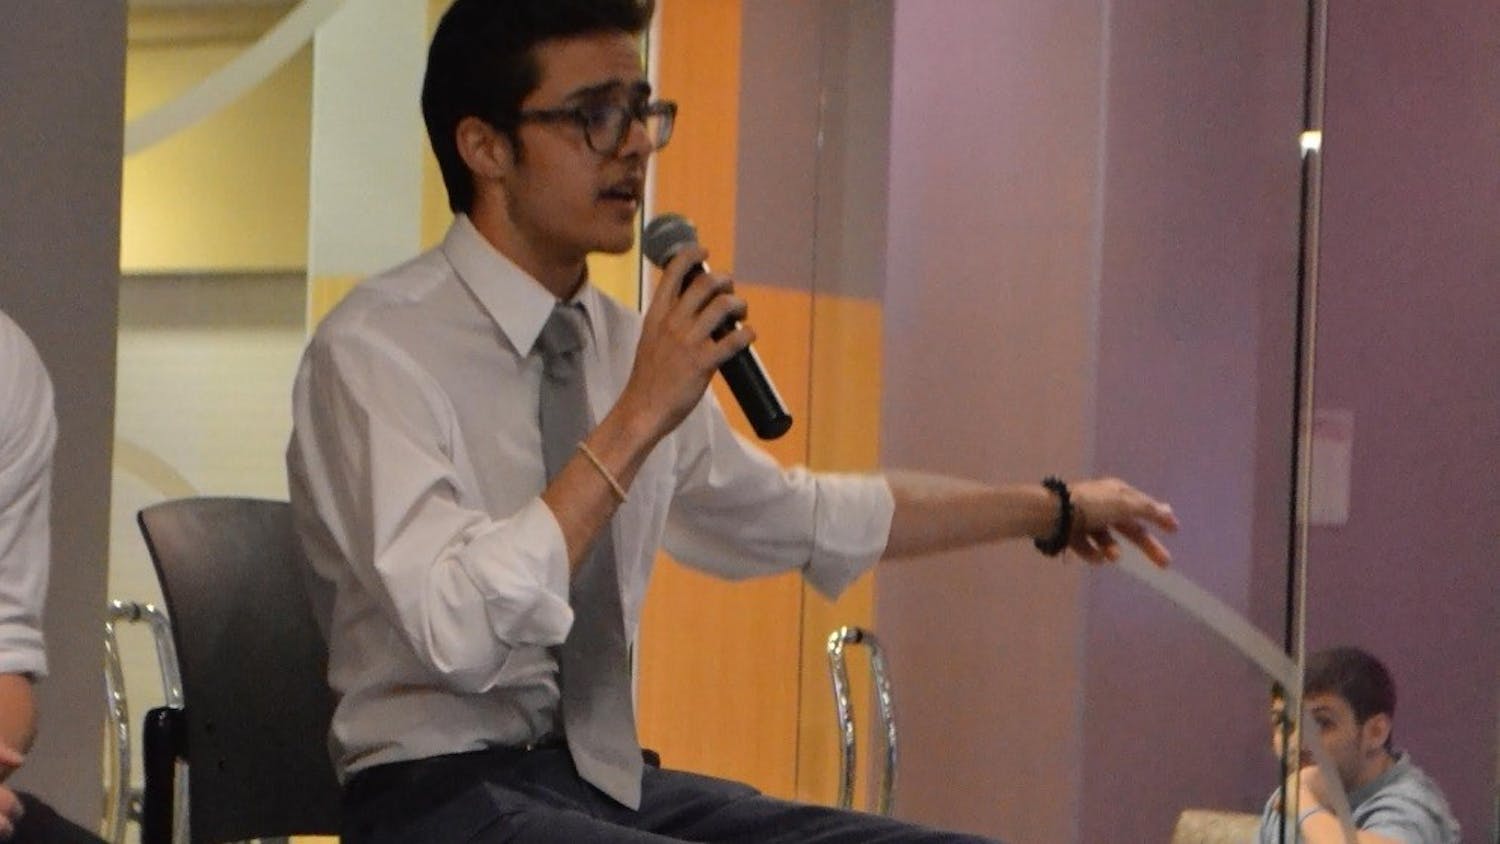 Will Mascaro, pictured at a student government presidential debate in 2016, was fired from his position as CASE director on Oct. 31. Supporters are calling for his reinstatement.